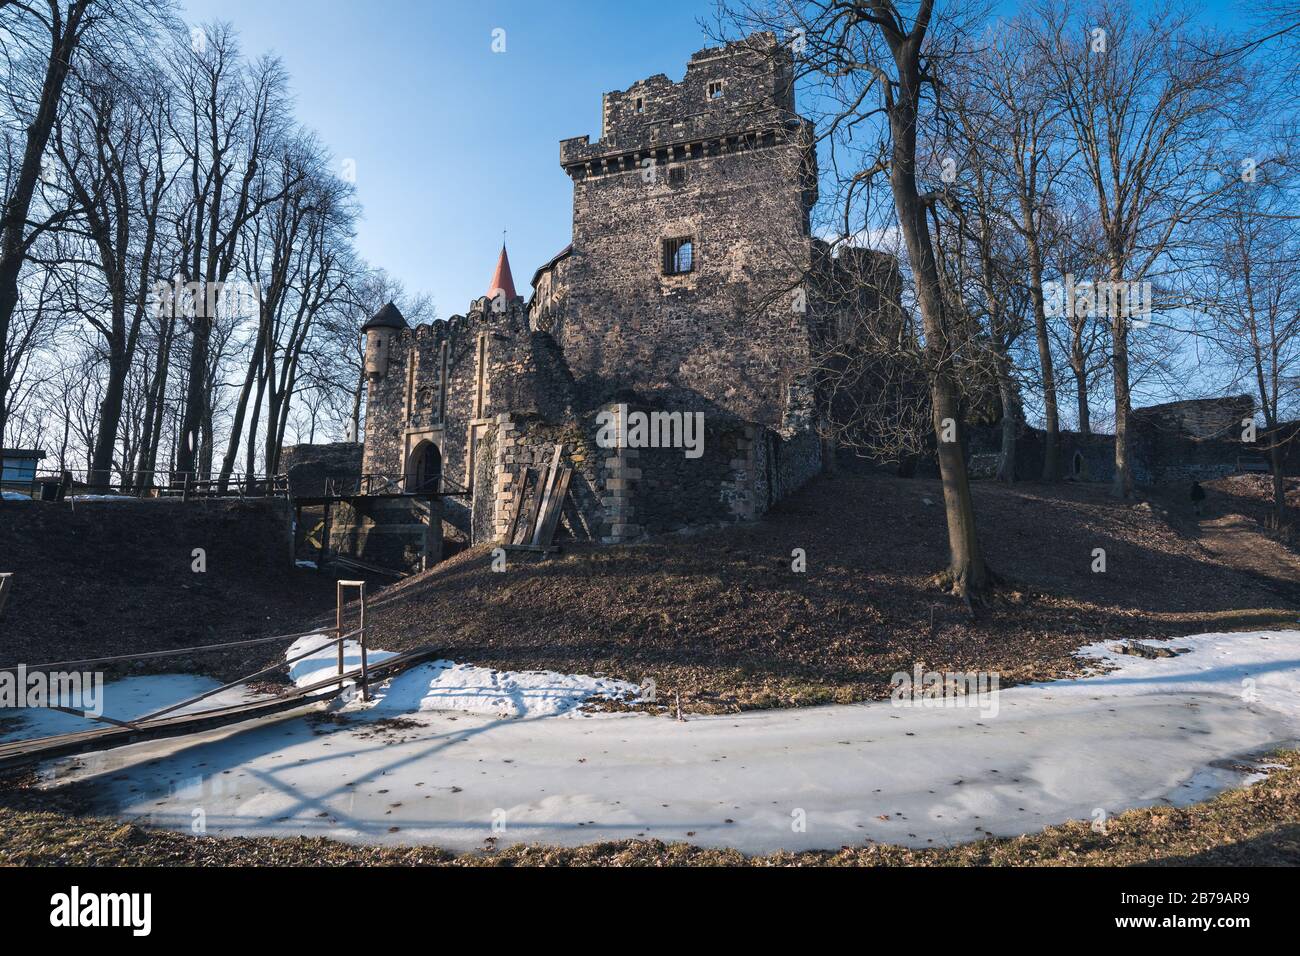 Castle Grodziec, Poland. One of the European Route of Castles and Palaces. Stock Photo